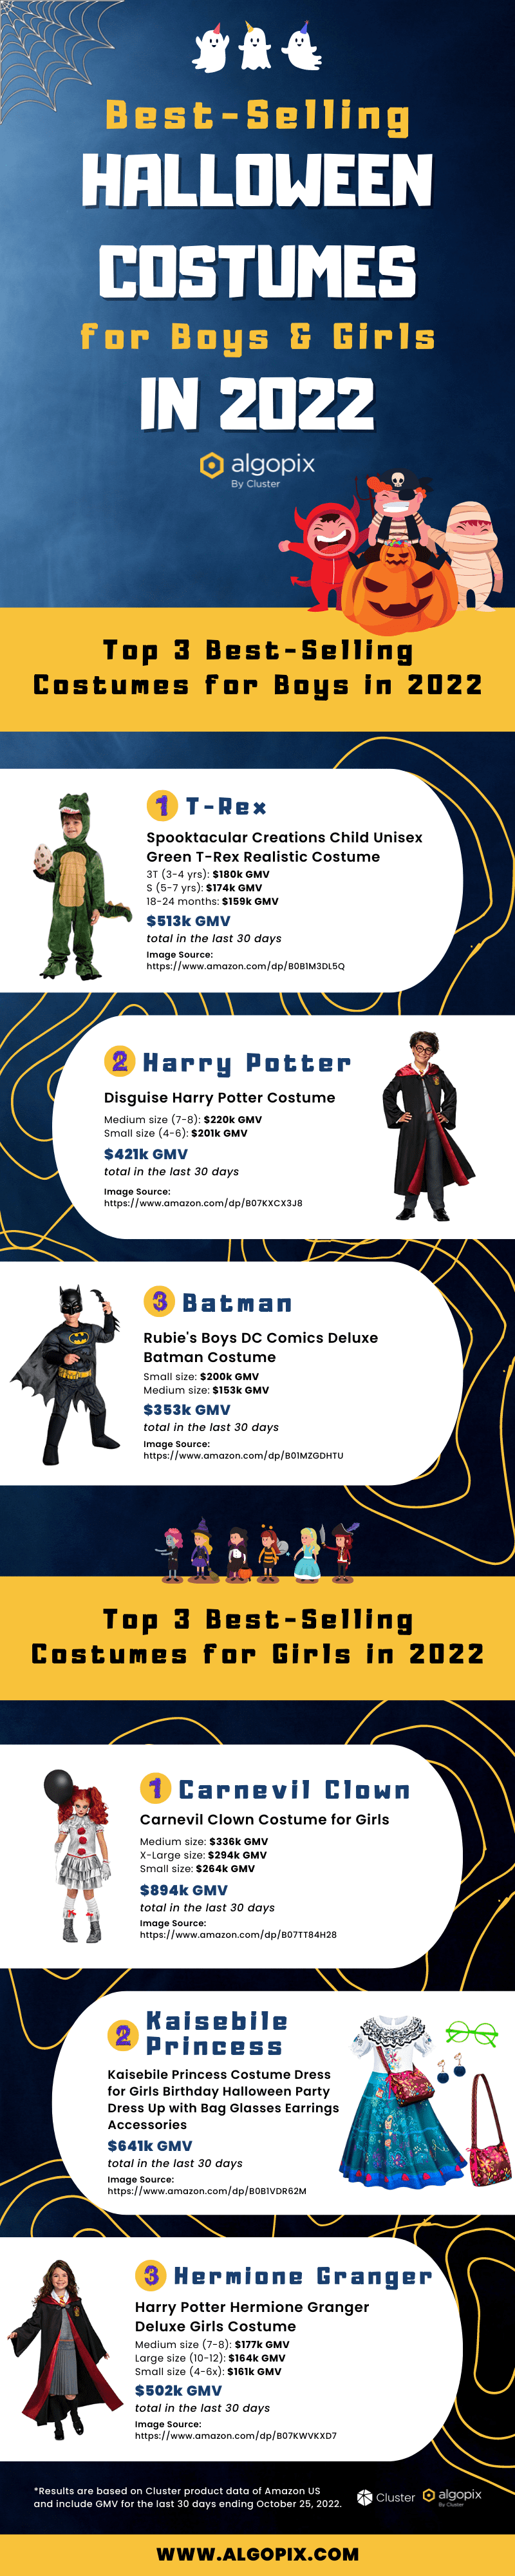 Top-Selling Halloween Costumes For Boys and Girls in 2022 by Algopix.com